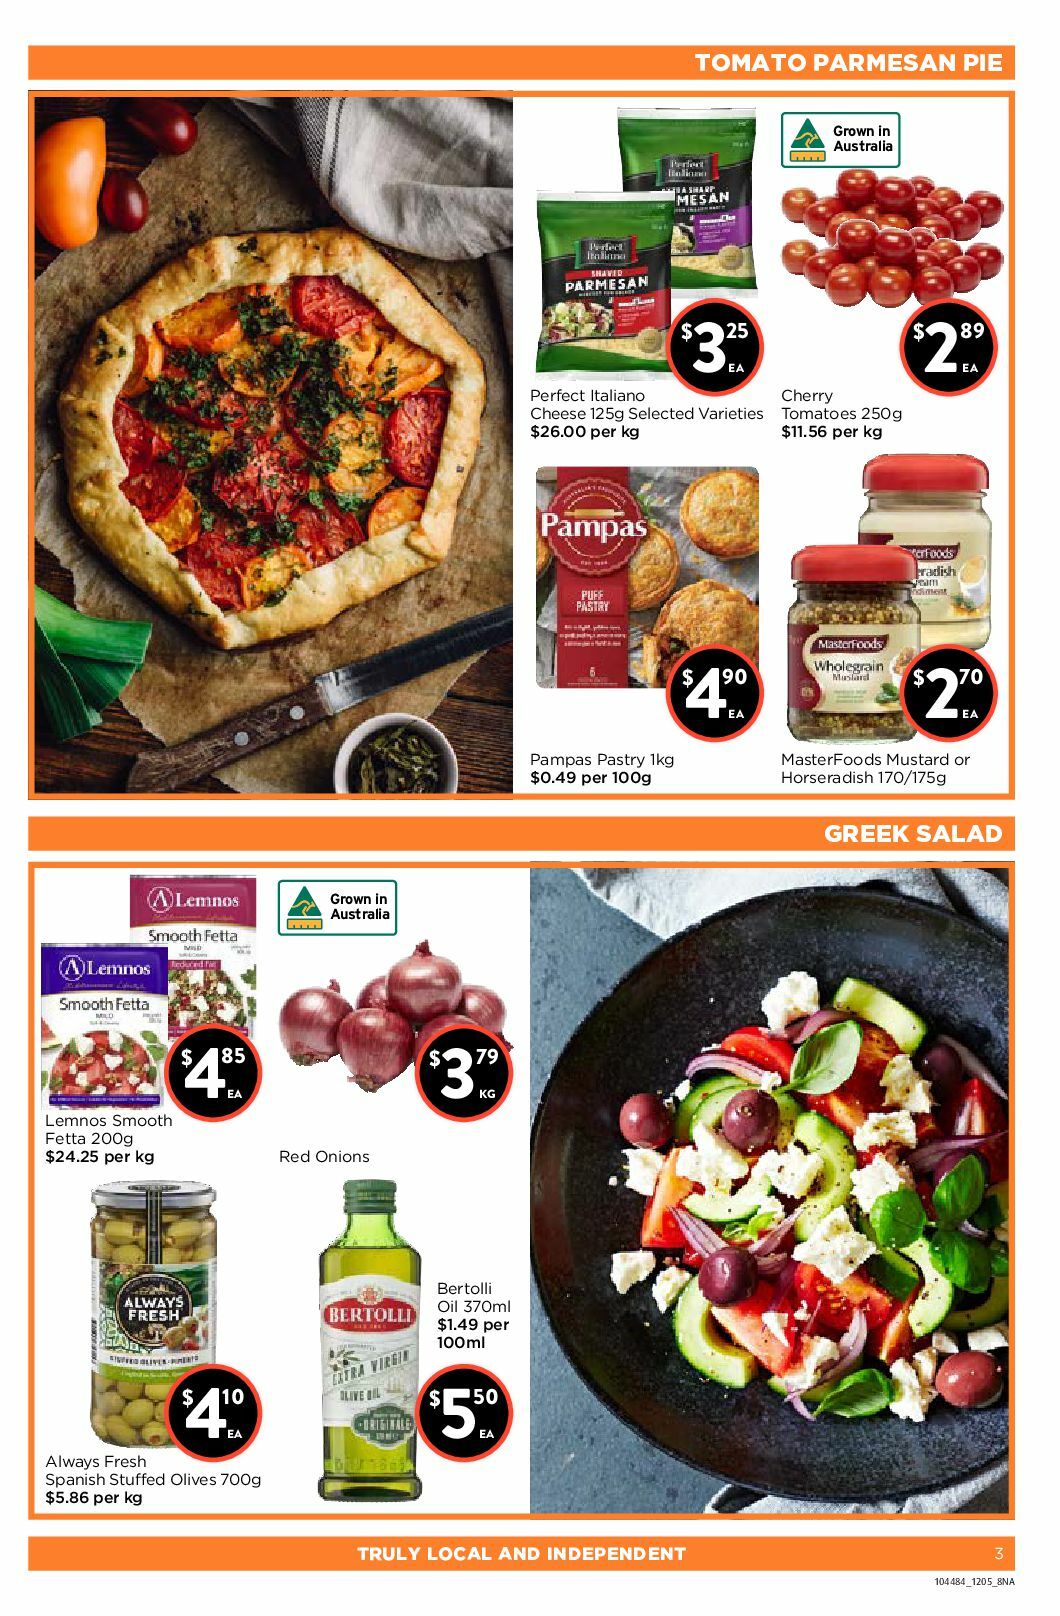 FoodWorks Catalogues from 12 May